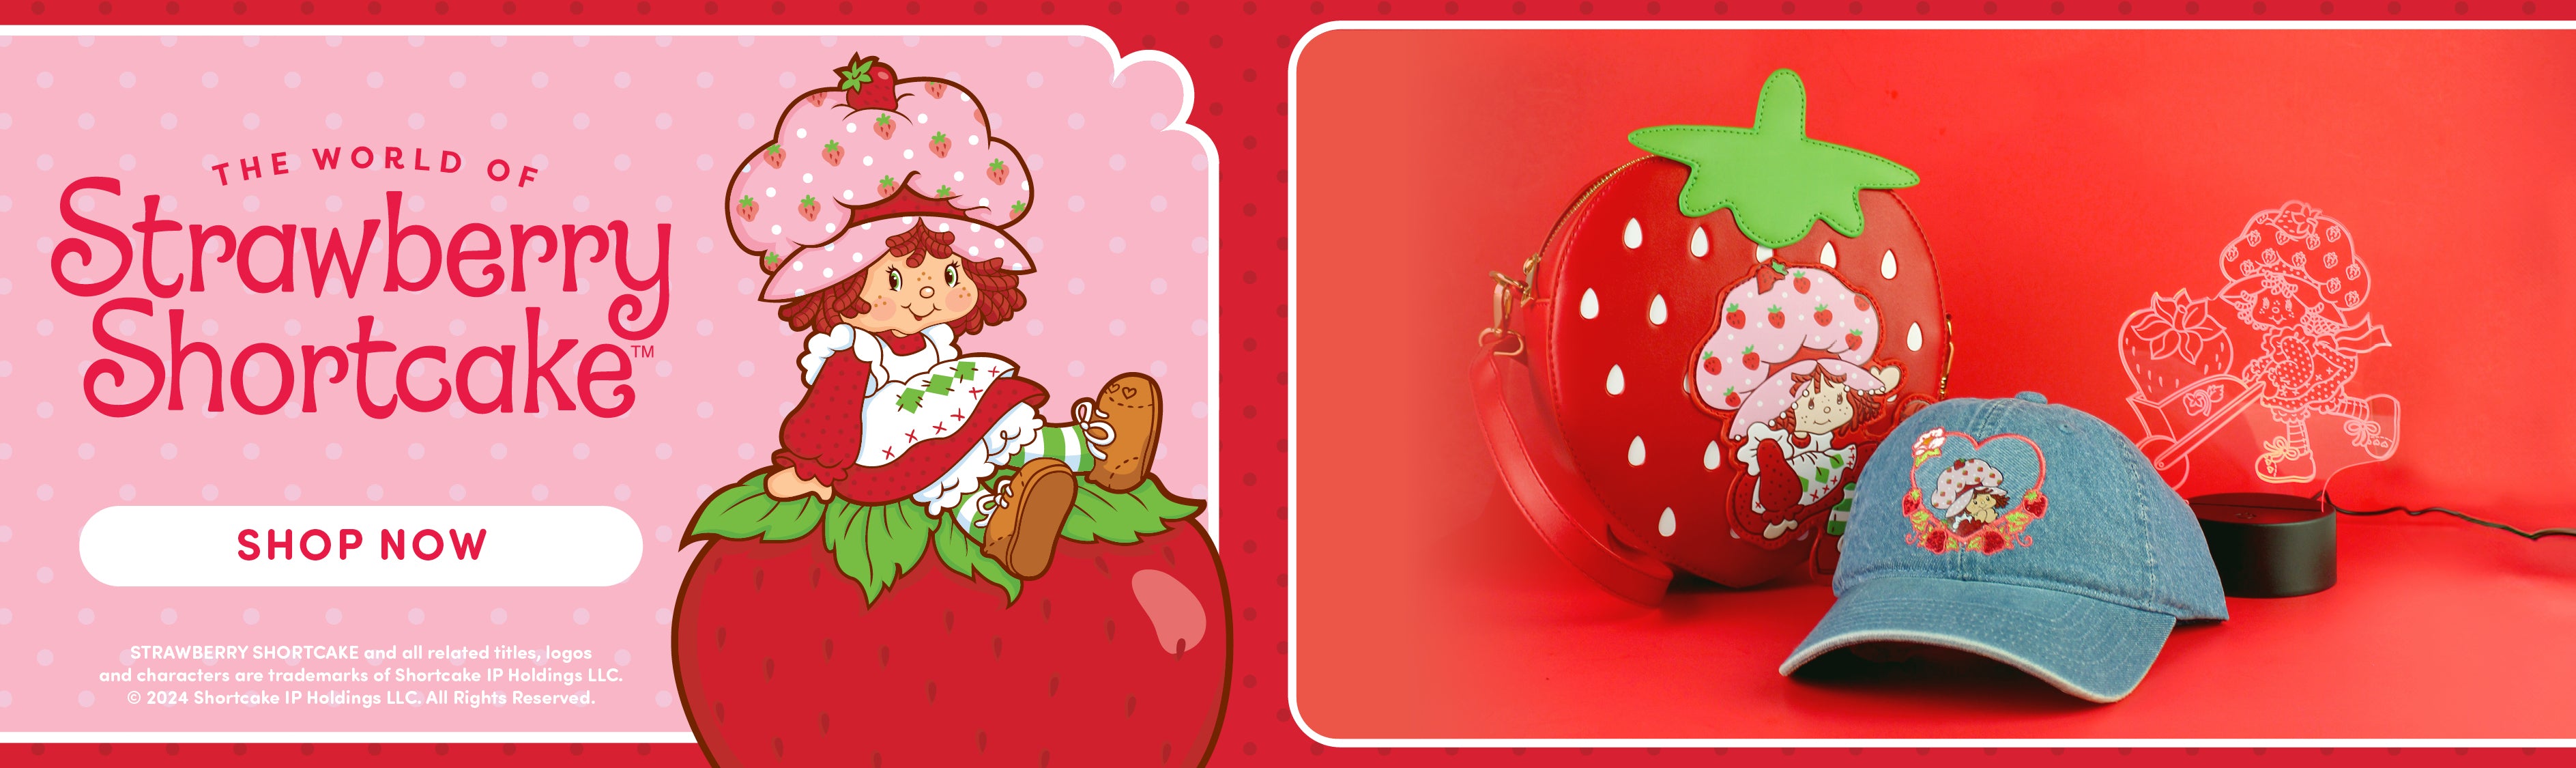 Strawberry Shortcake Collection - Shop Now!